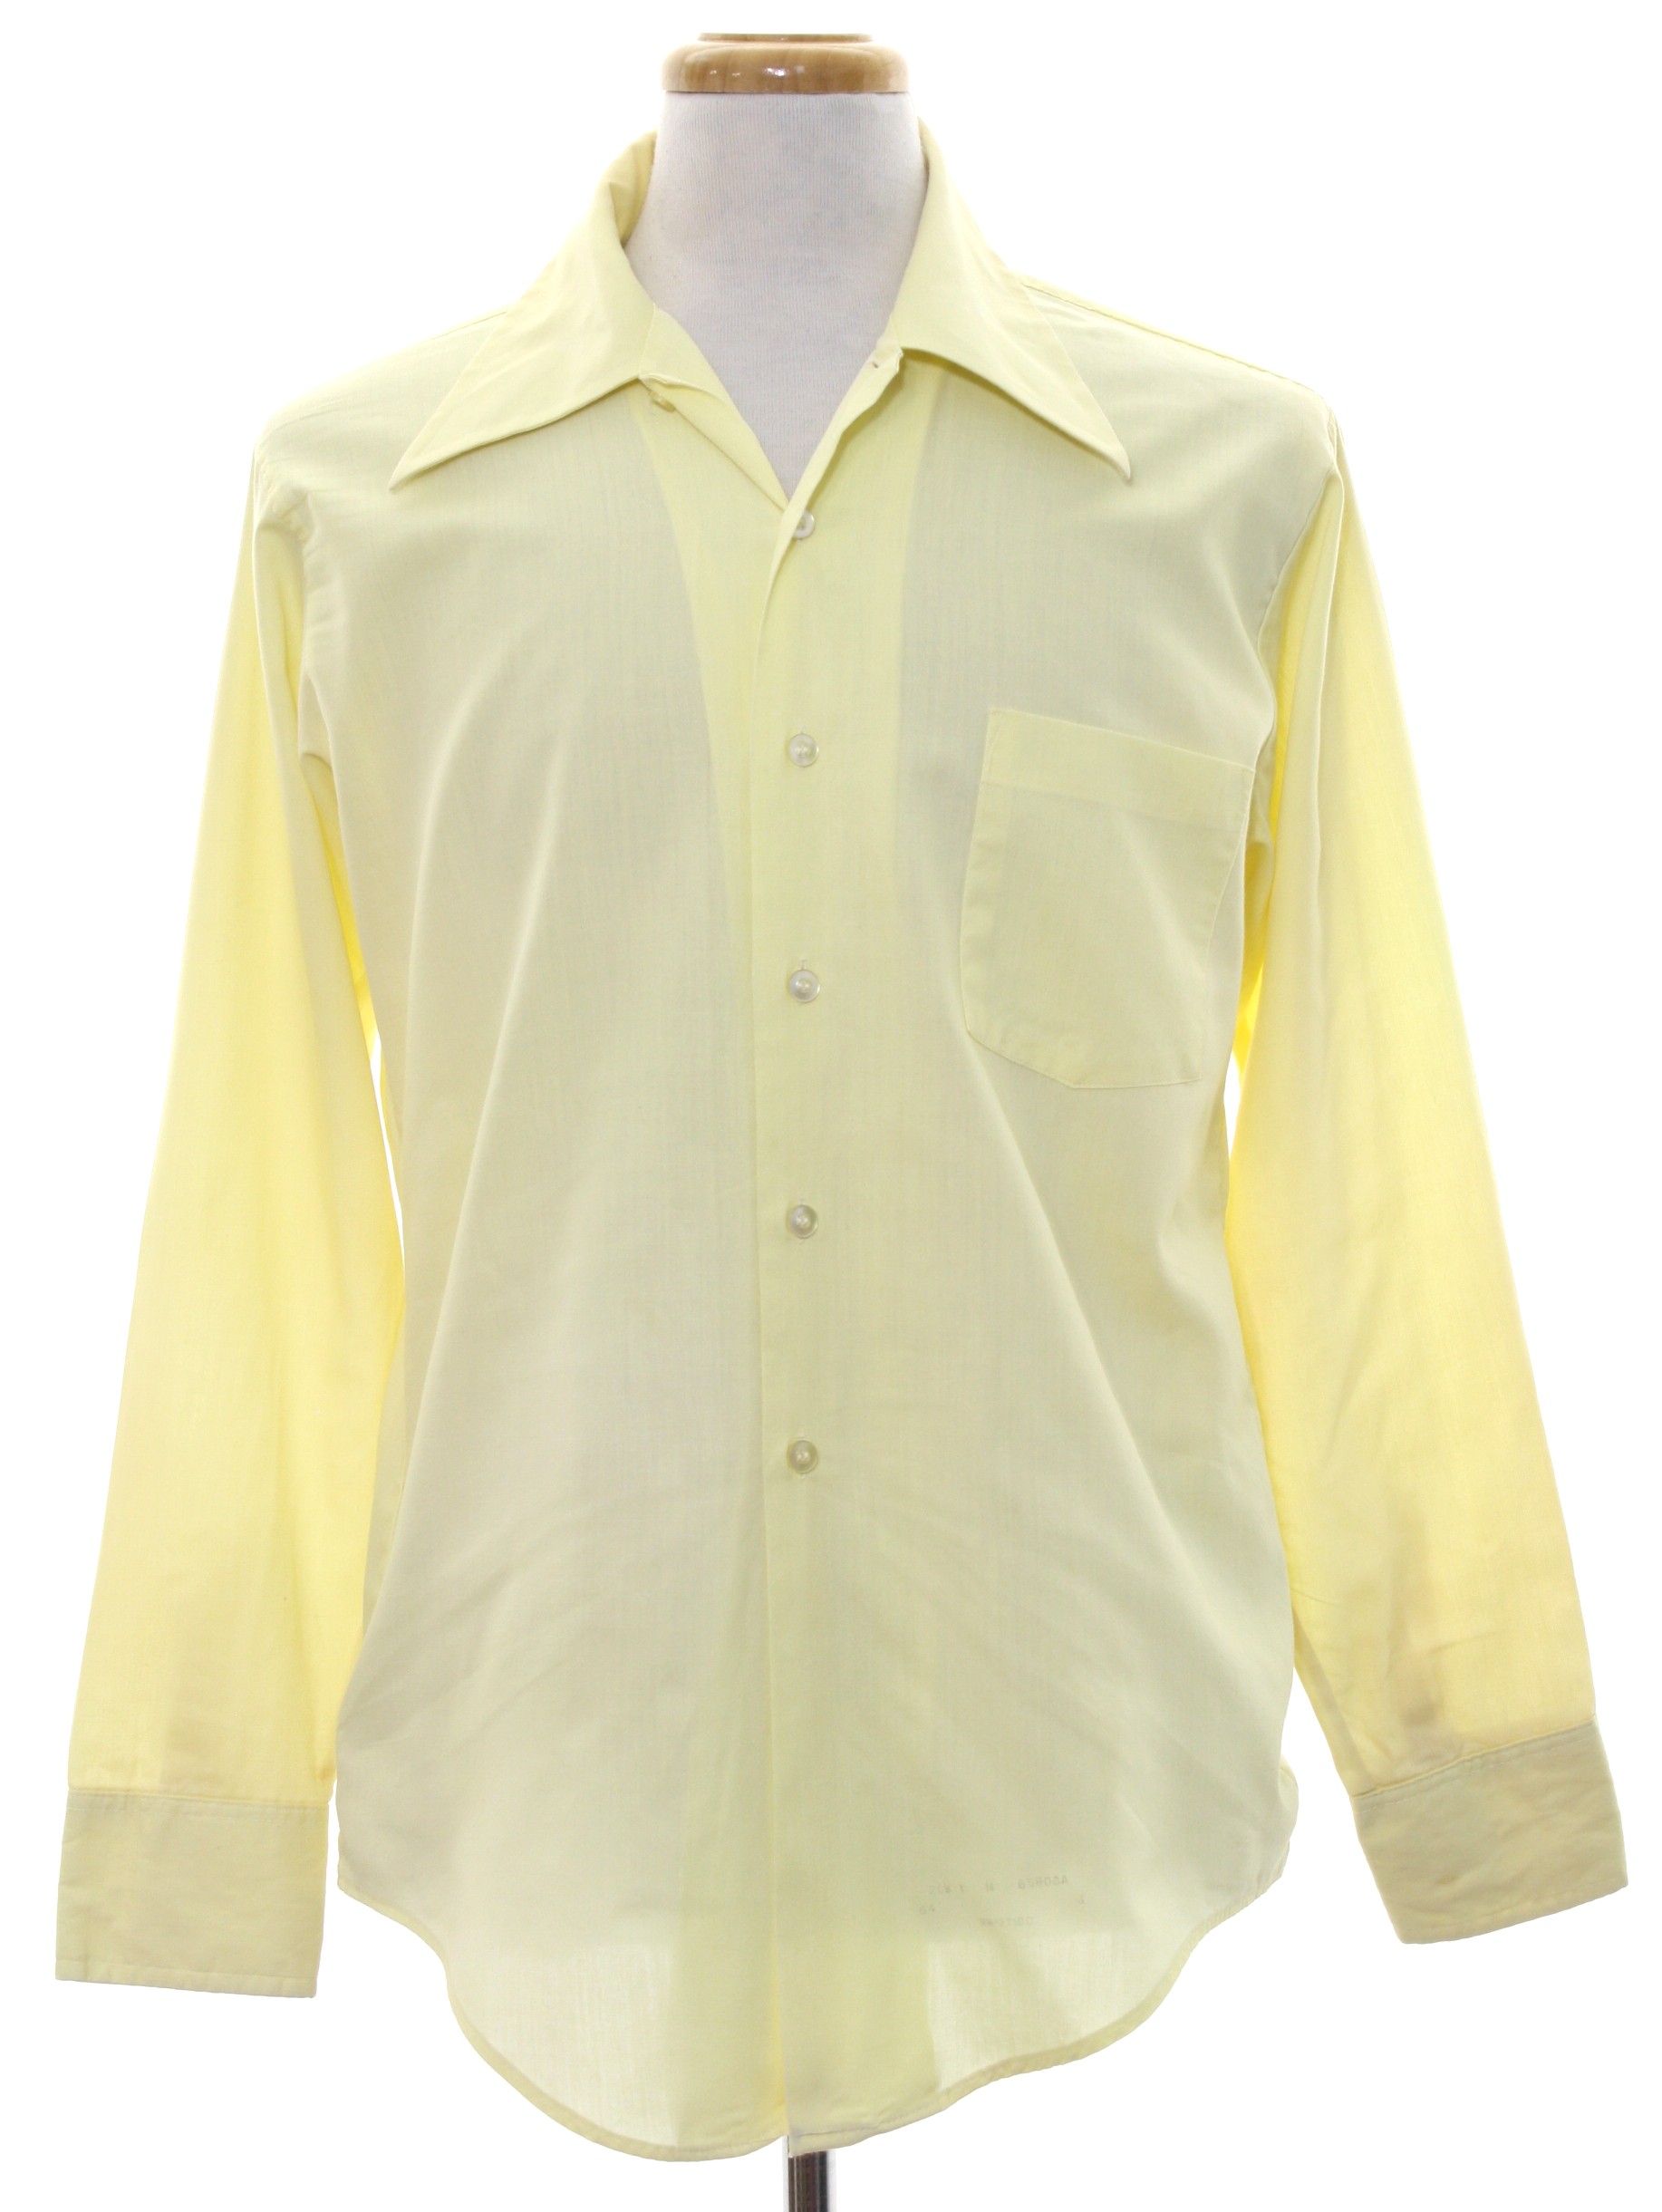 Kmart 1970s Vintage Shirt: Late 70s or Early 80s -Kmart- Mens light ...